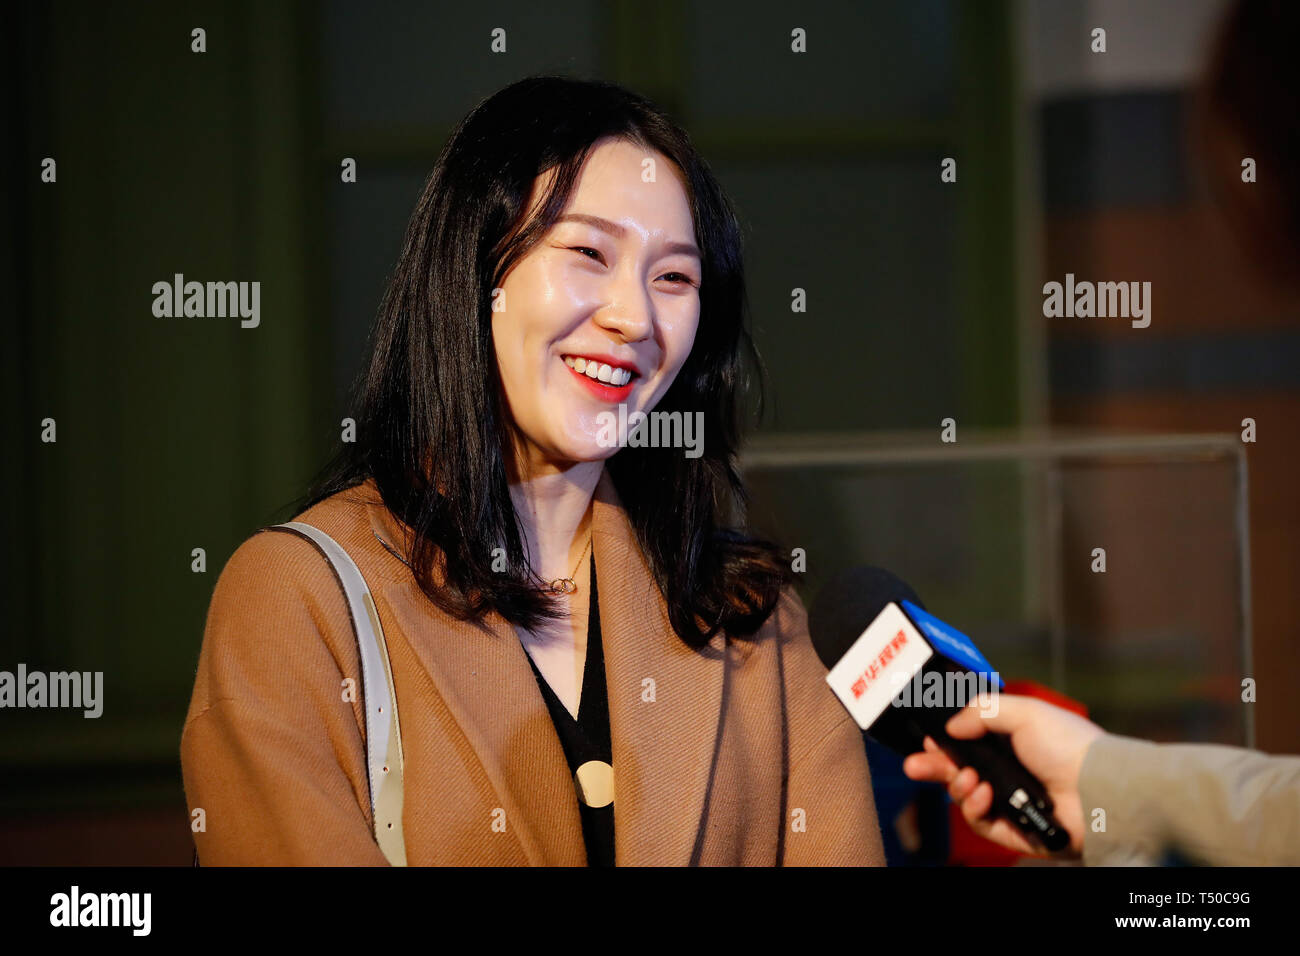 Seoul, South Korea. 2nd Apr, 2019. Kim Dong-yeon, a South Korean graduate student, attends an interview at a DMZ exhibition in the Culture Station Seoul 284 in Seoul, South Korea, April 2, 2019. TO GO WITH Spotlight: DMZ exhibition in S. Korea depicts transition, imagines future on Korean Peninsula Credit: Wang Jingqiang/Xinhua/Alamy Live News Stock Photo